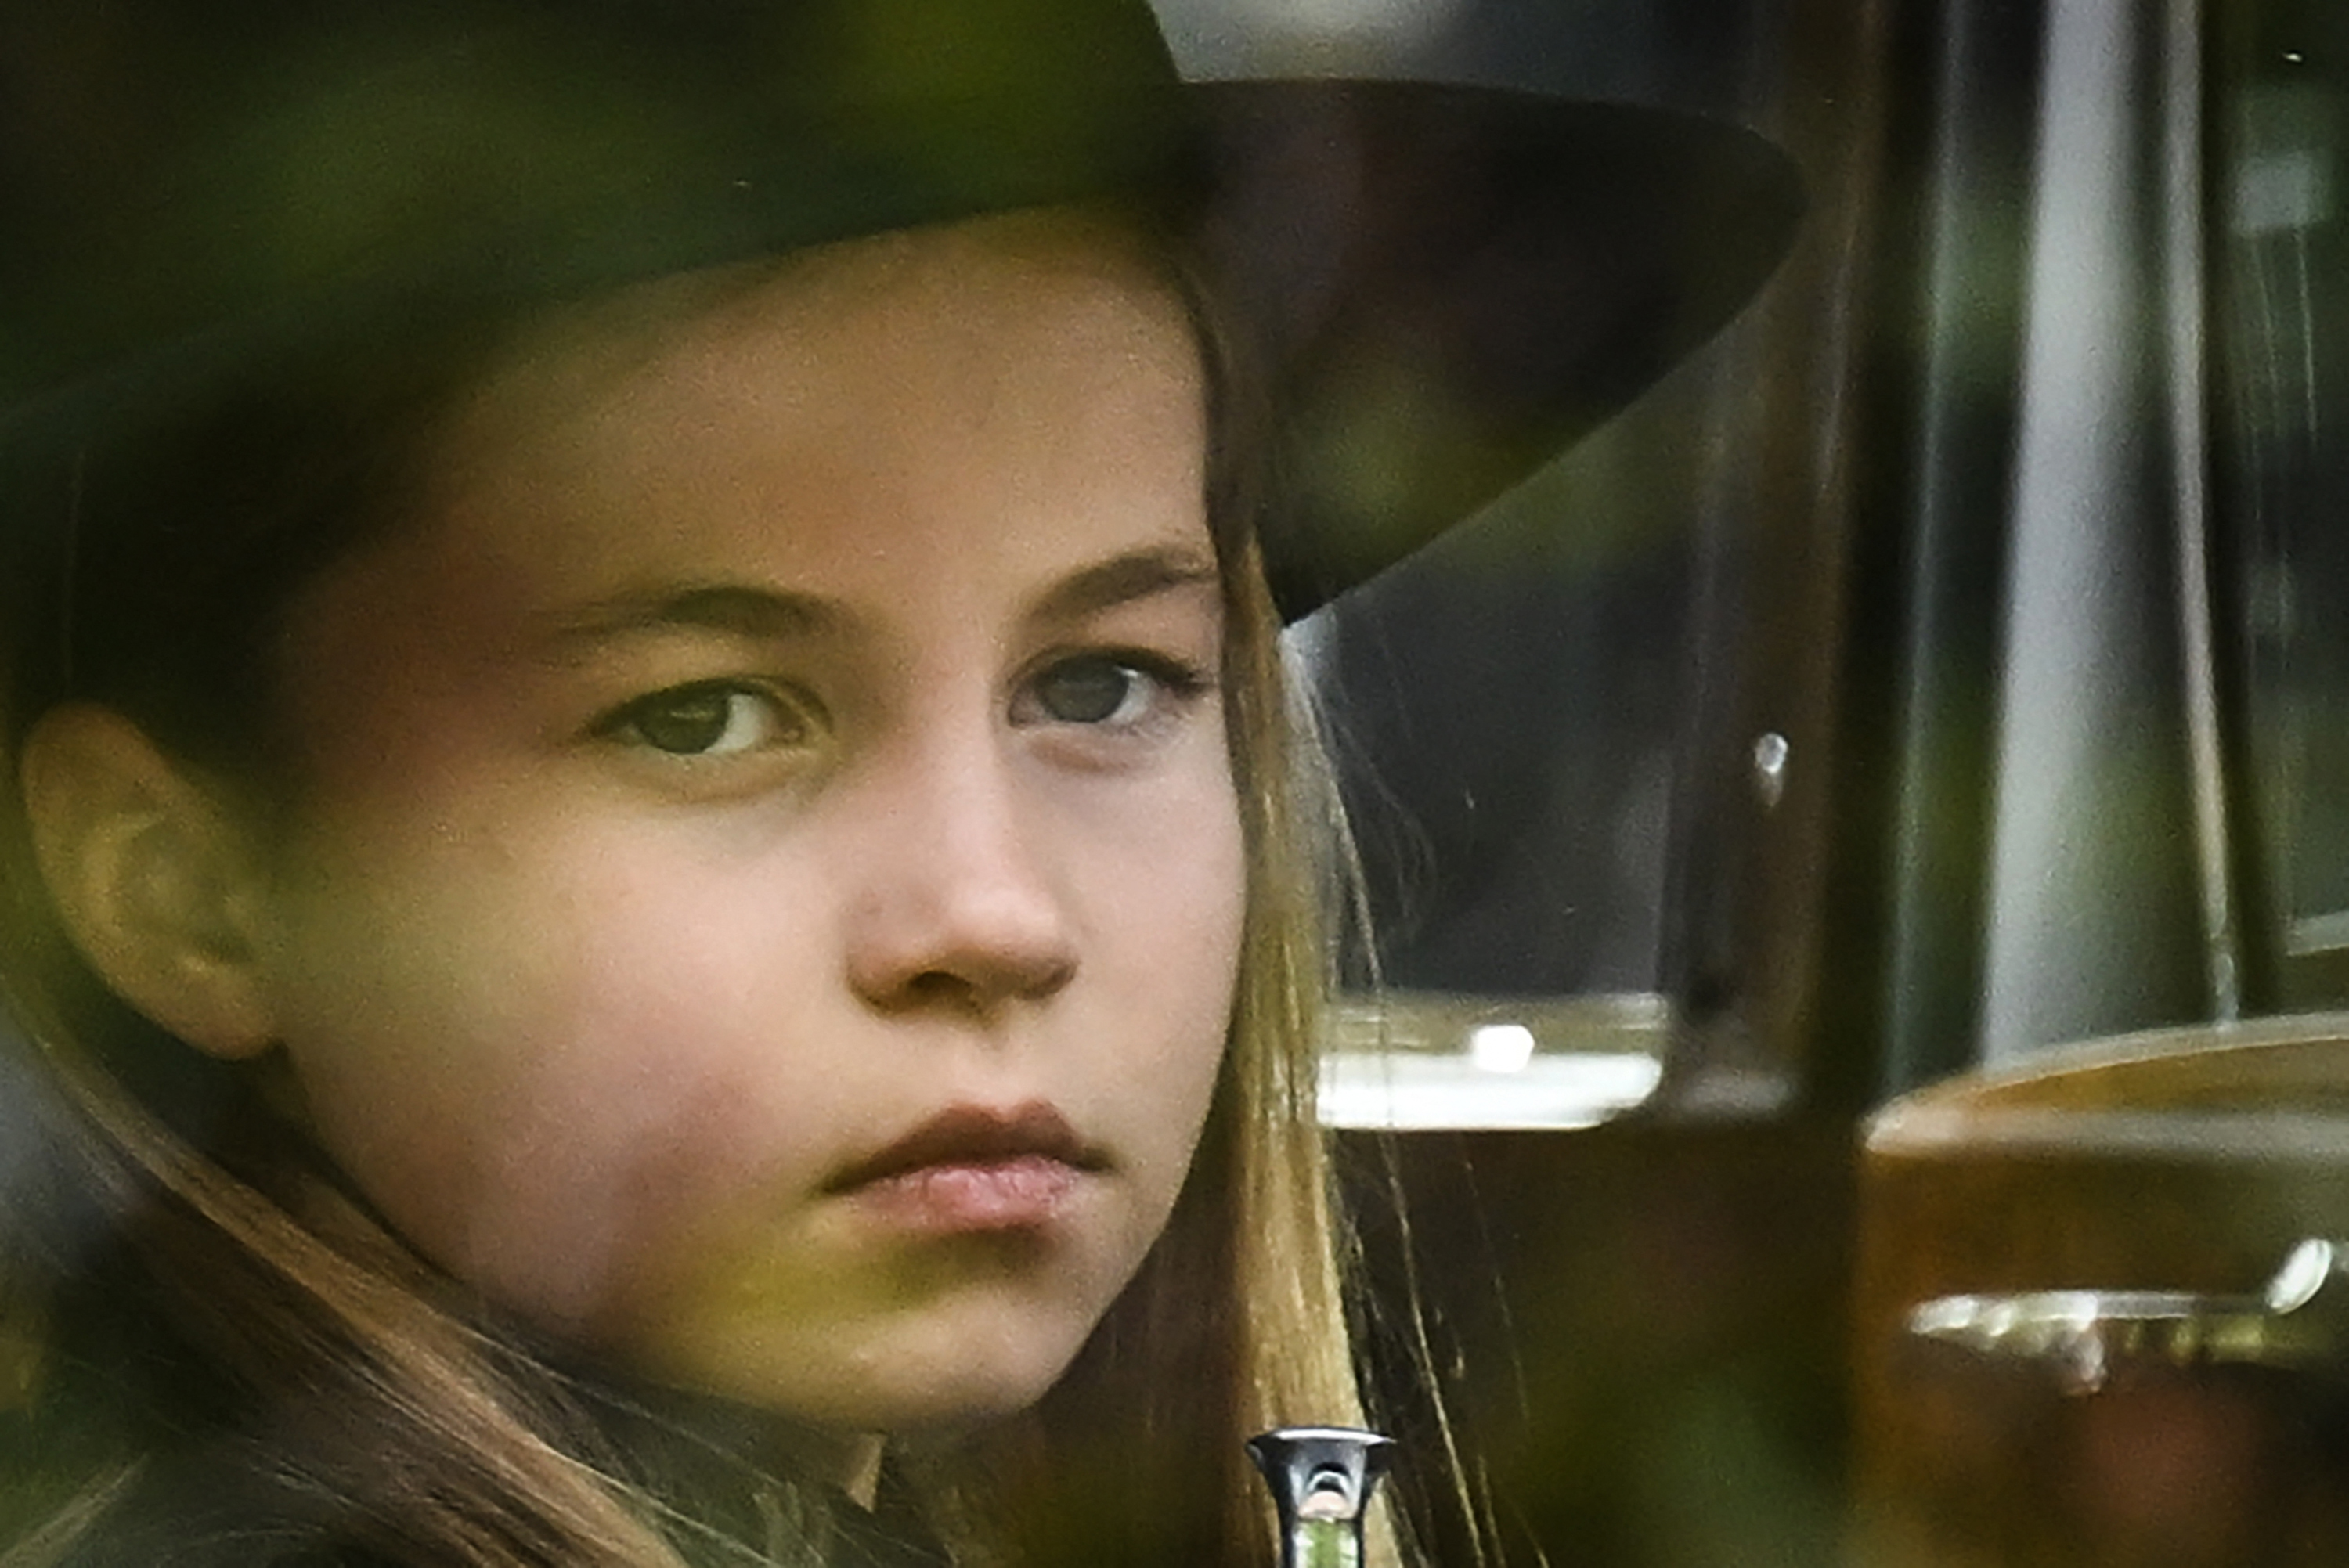 <p>Britain's Princess Charlotte of Wales gazed at mourners as her car followed the coffin of great-grandmother Queen Elizabeth II as it traveled on the State Gun Carriage of the Royal Navy from Westminster Abbey to Wellington Arch in London on Sept. 19, 2022, during <a href="https://www.wonderwall.com/celebrity/royals/best-photos-from-queen-elizabeth-ii-funeral-king-charles-princes-william-prince-harry-george-charlotte-kate-meghan652347.gallery">the monarch's state funeral</a>.</p>